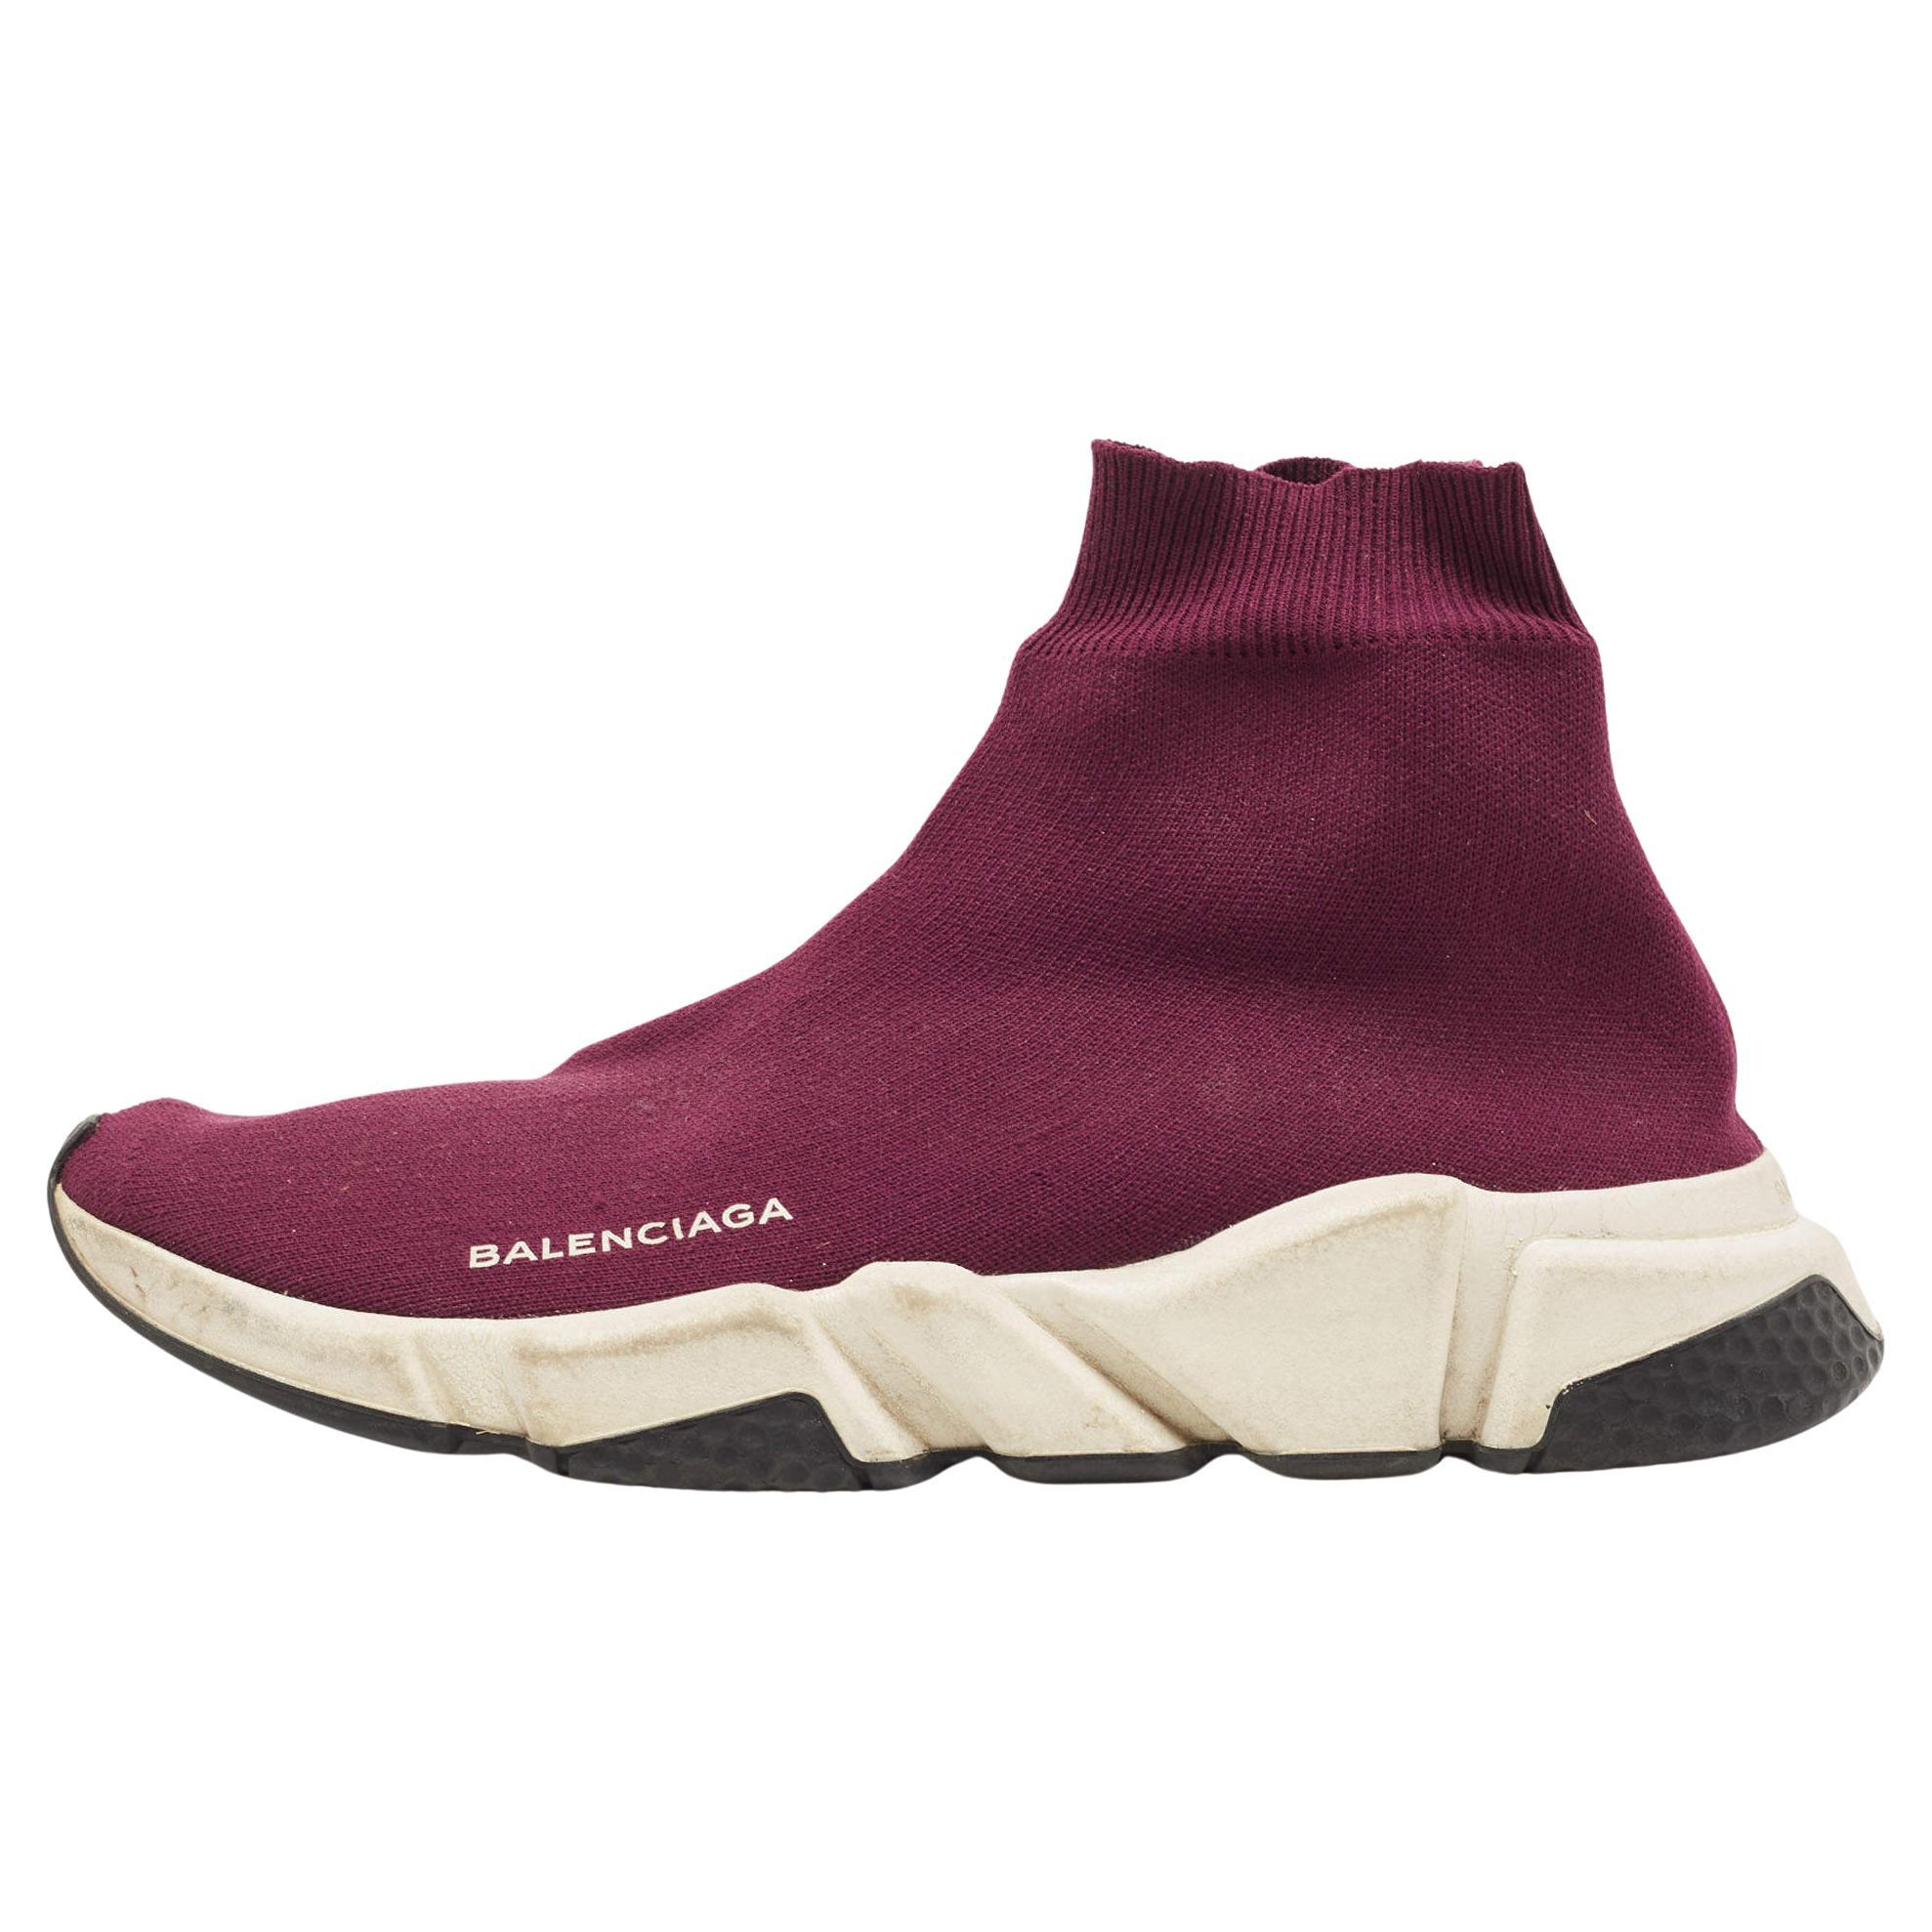 Balenciaga Speed Trainers 41 - 2 For Sale on 1stDibs